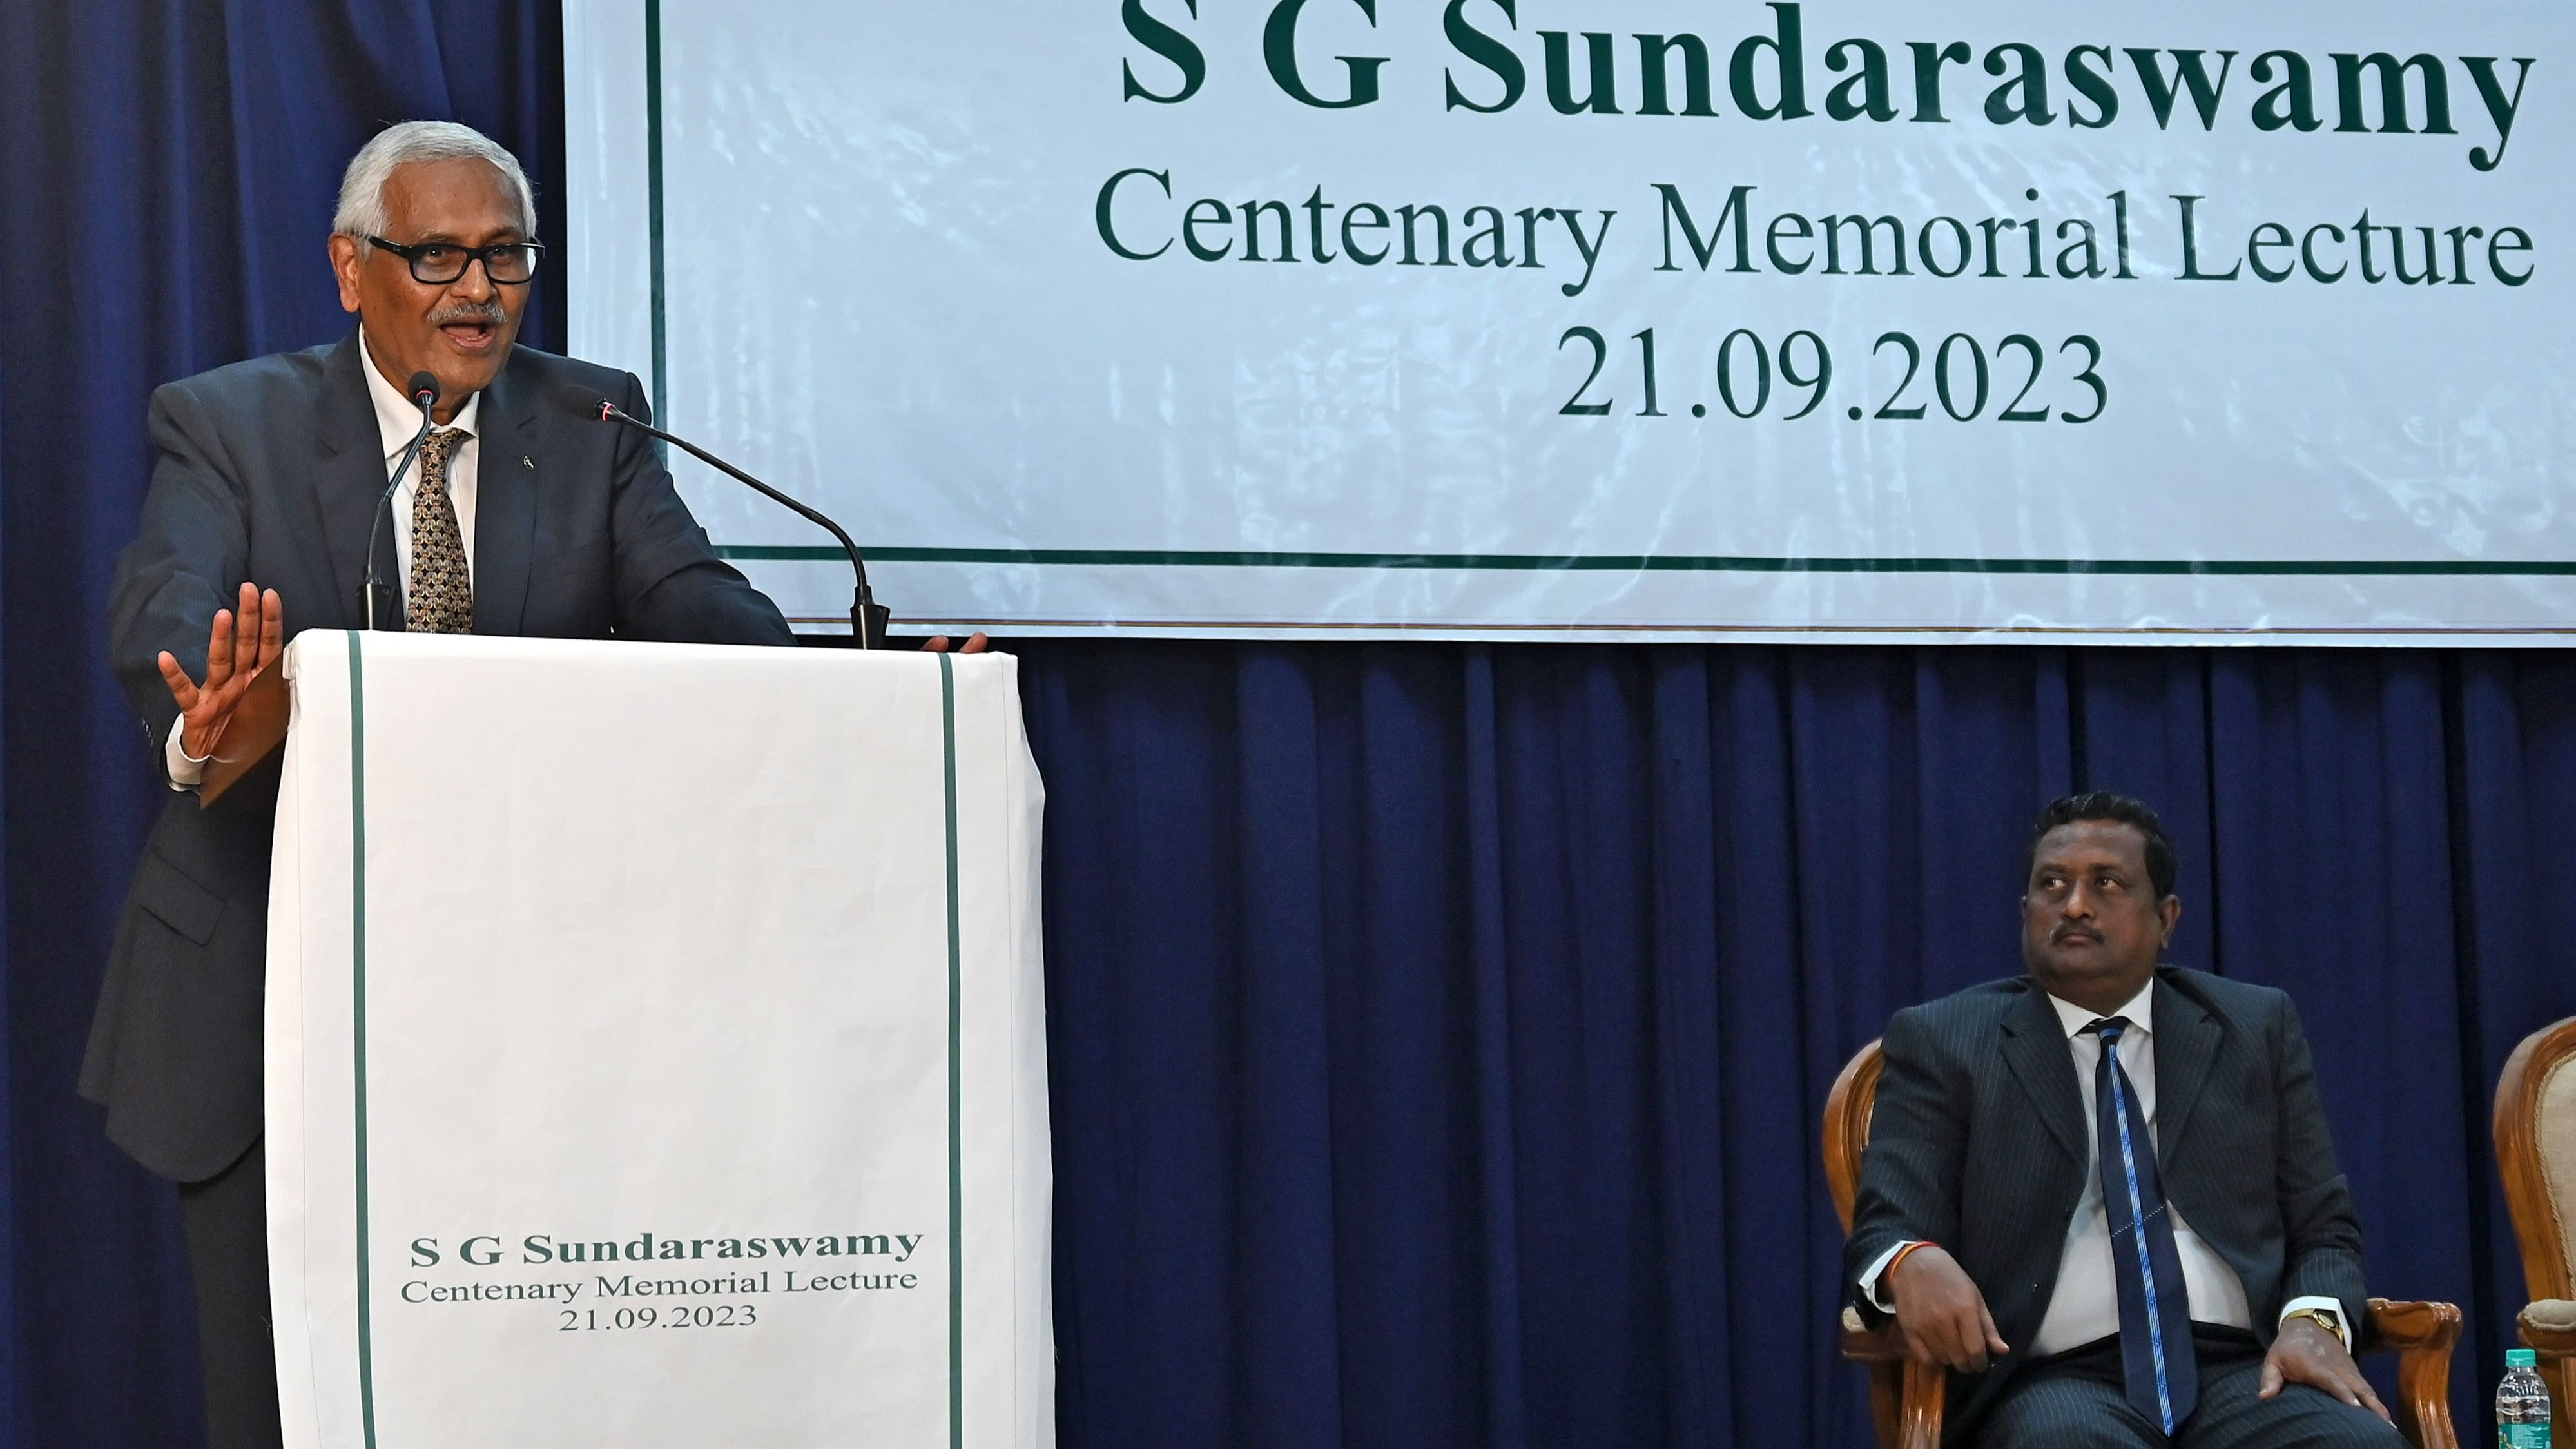 <div class="paragraphs"><p>Former judge of the Supreme Court&nbsp;Justice R V Raveendran delivers the S G Sundaraswamy centenary memorial lecture in Bengaluru on Thursday. Chief Justice of Karnataka Prasanna B Varale is also seen. </p></div>